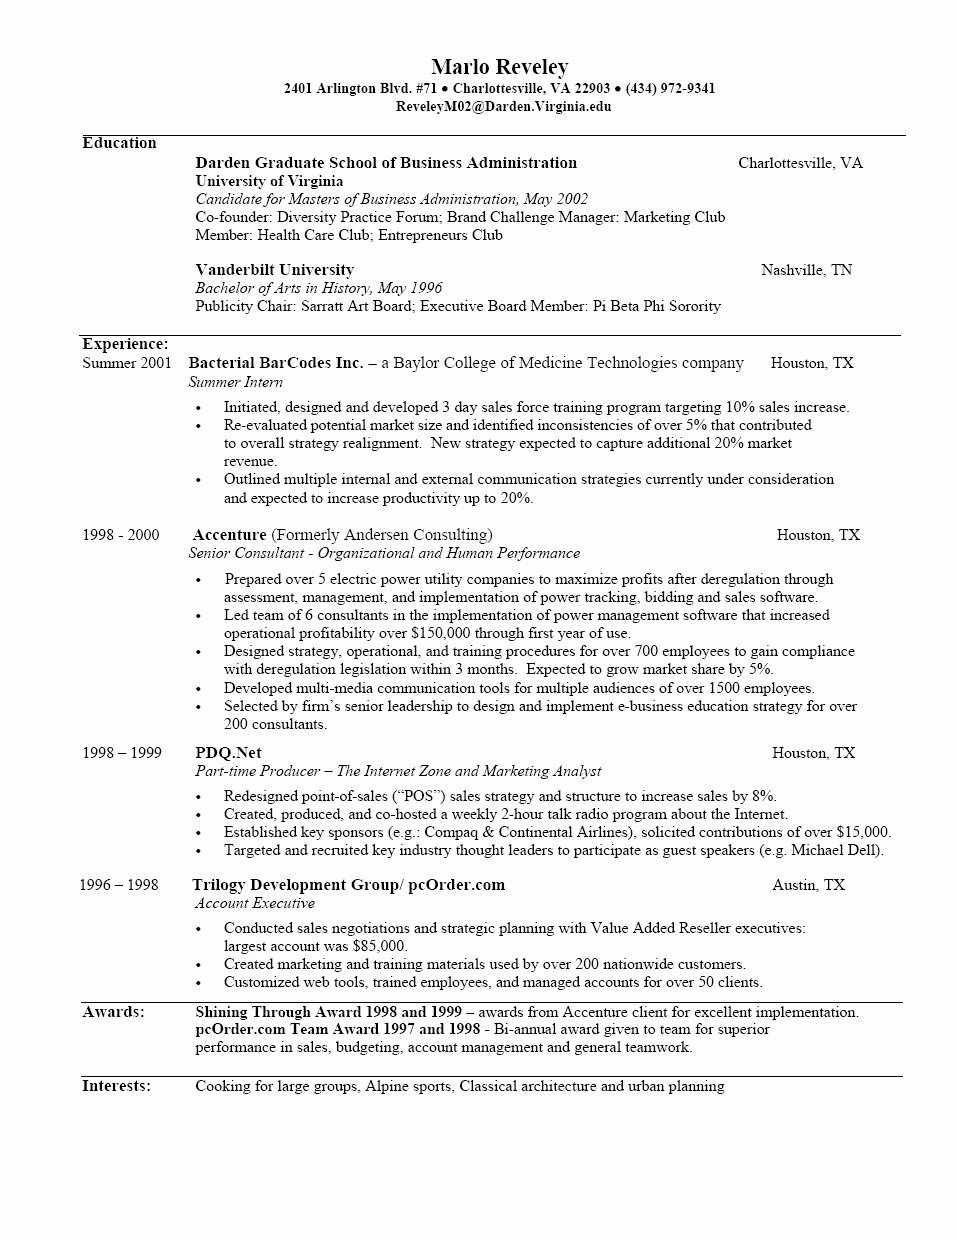 Sample Resume Template Free Resume Examples with Resume